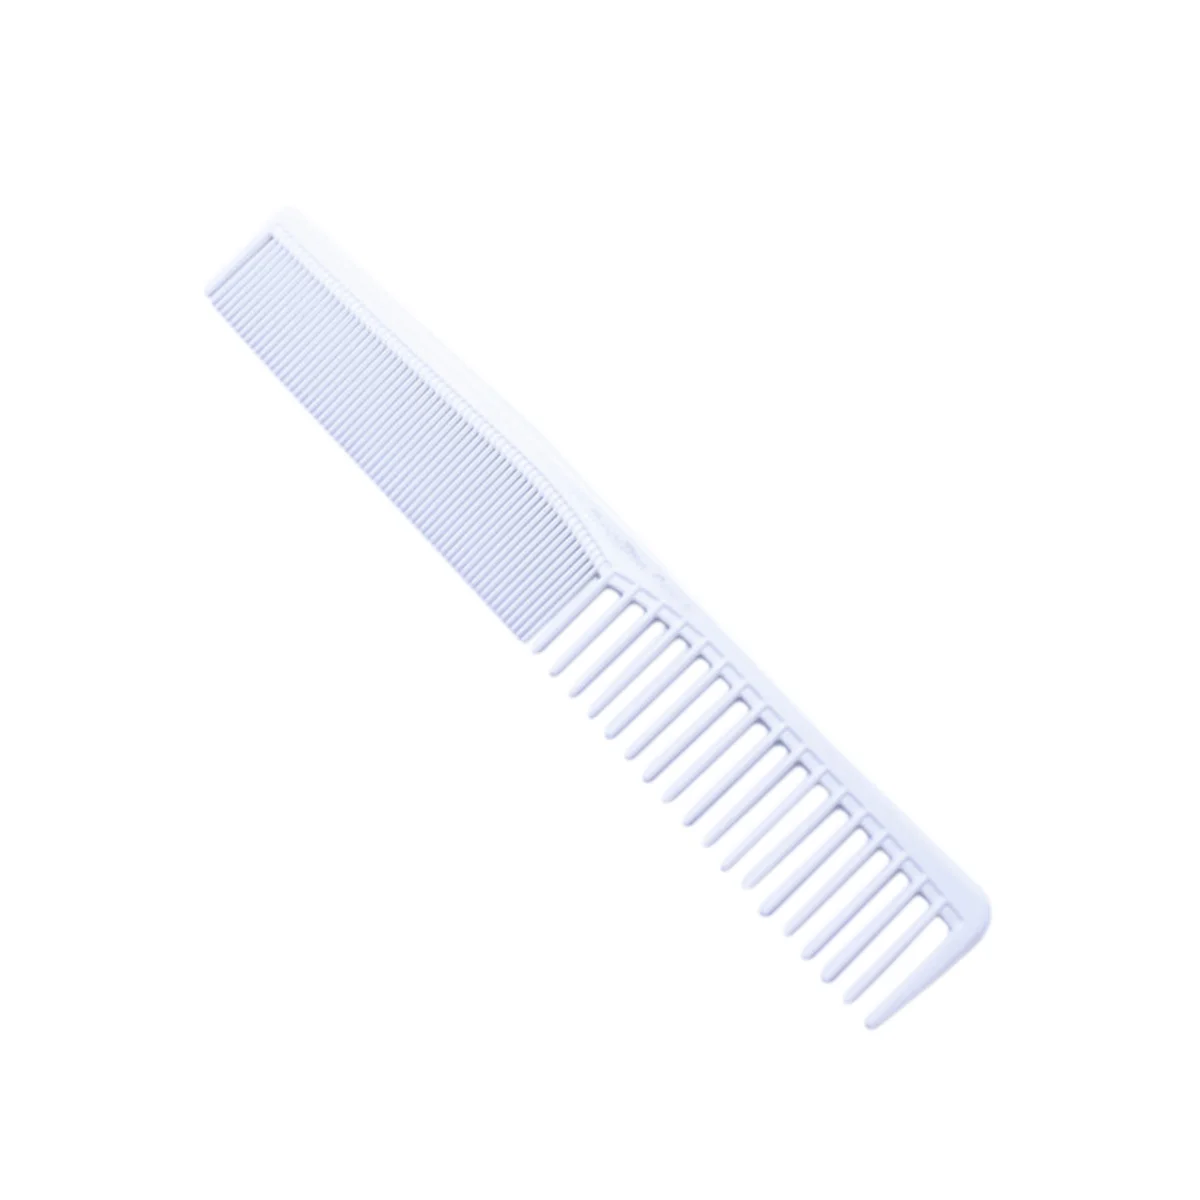 

Comb Hair Combs Barber Professional Cutting Haircut Salon Women Dressing Hairdressing Curly Men Stylist Resistant Style